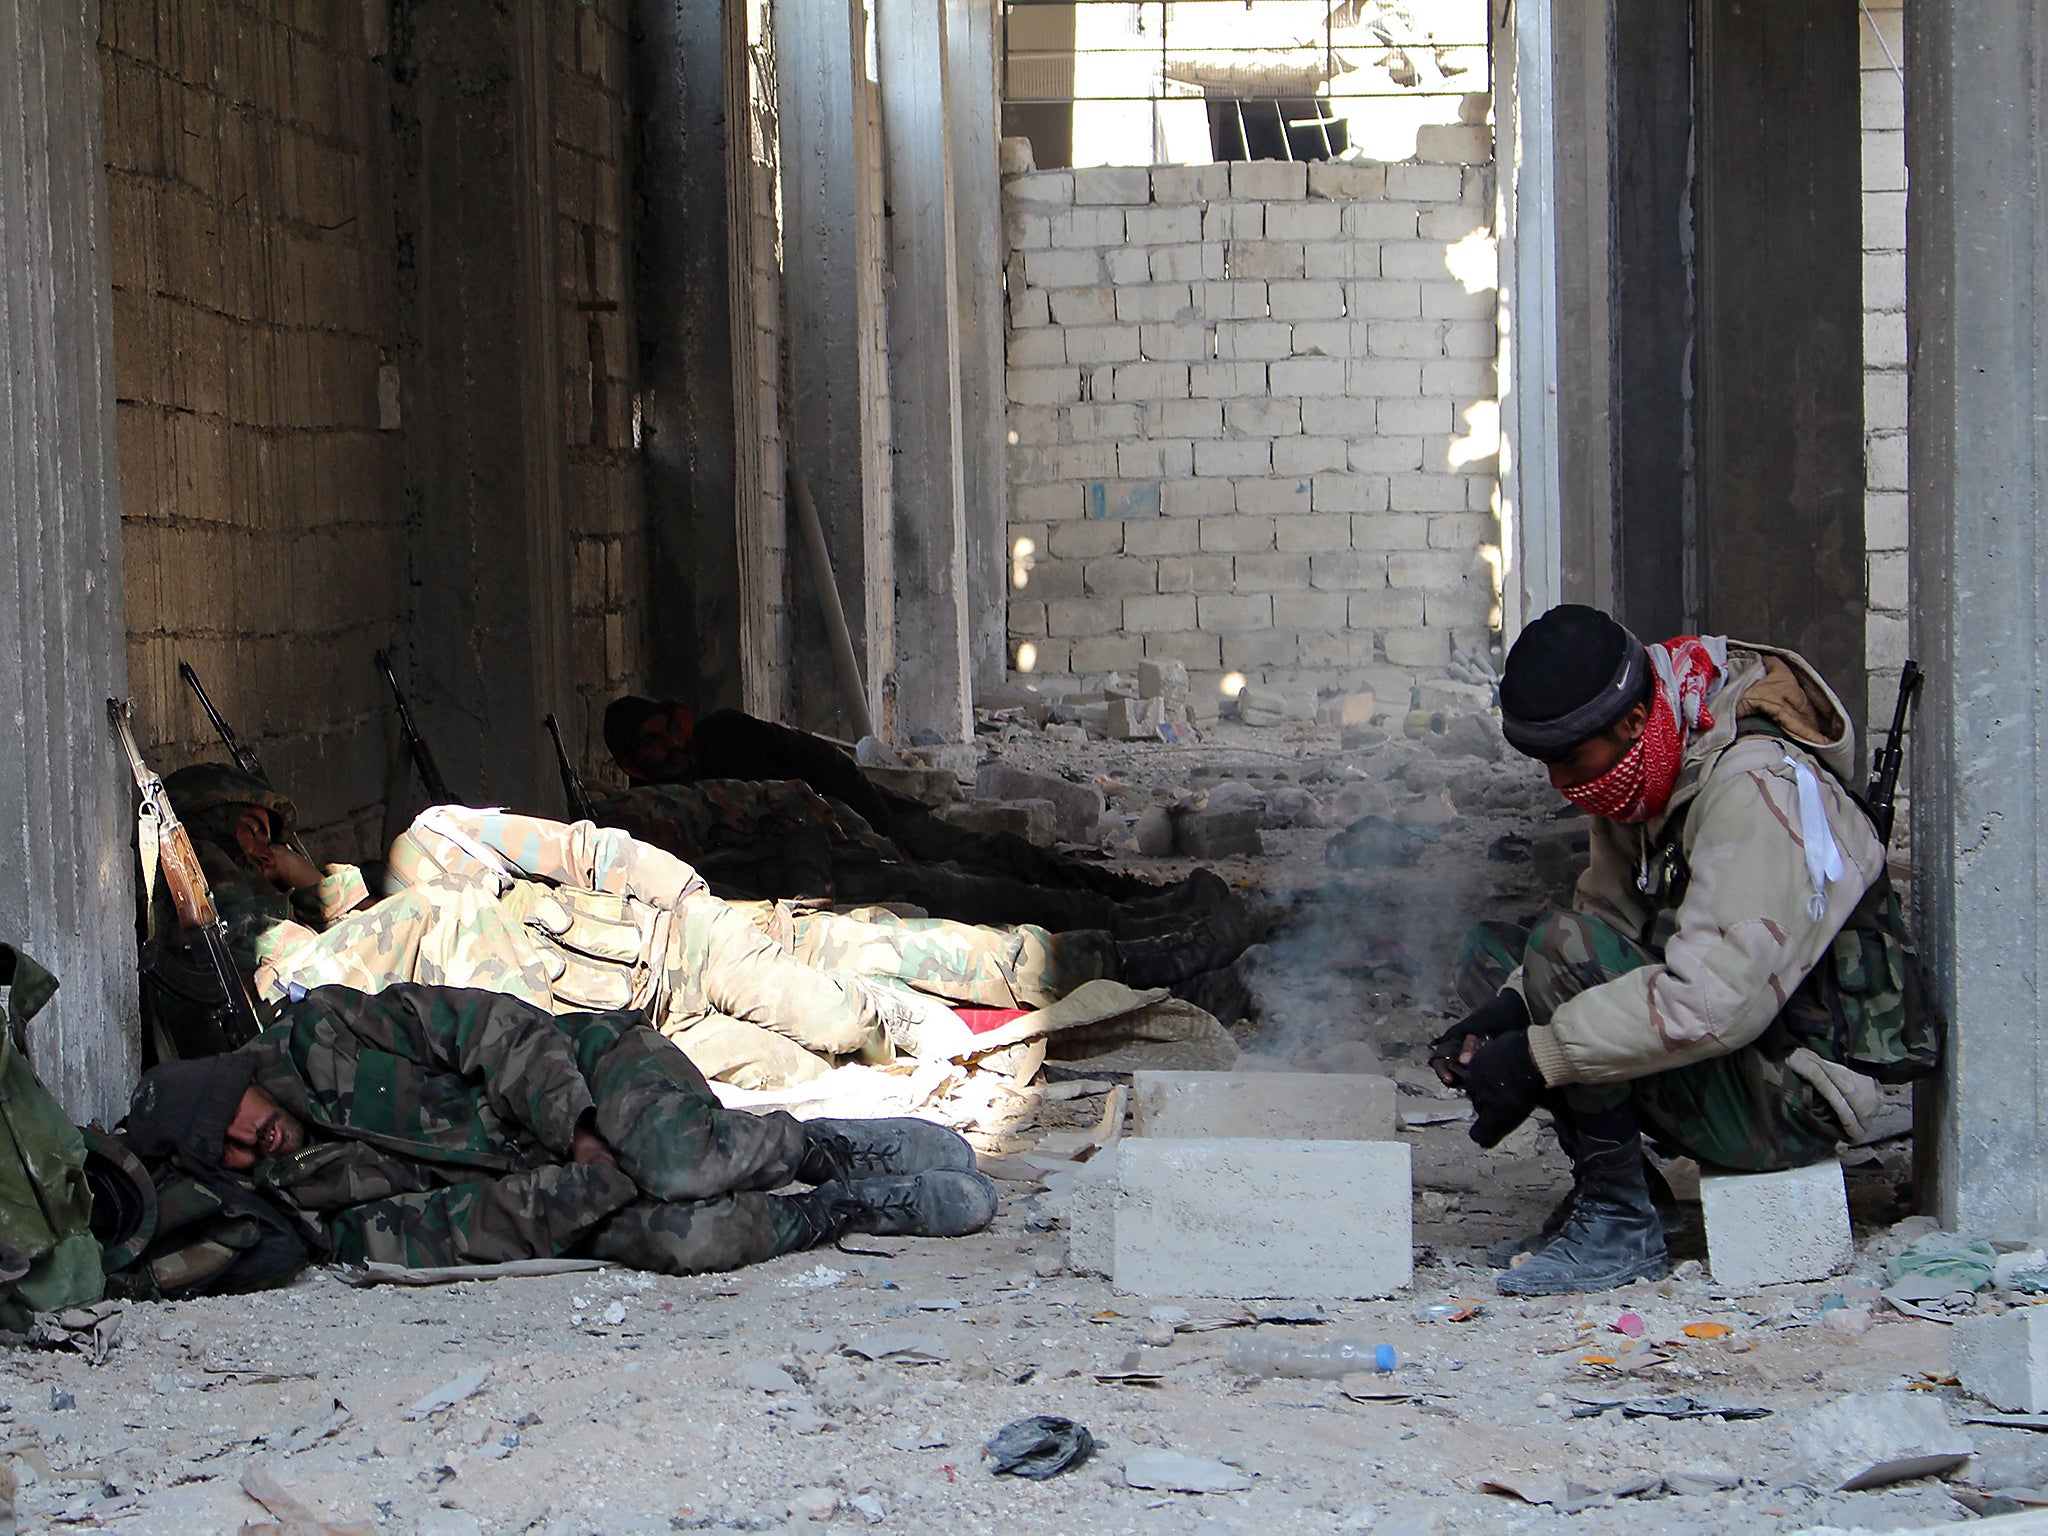 Syrian soldiers rest follow winning control of Sheik Saeed neighborhood in Aleppo, Syria, on December 12 2016